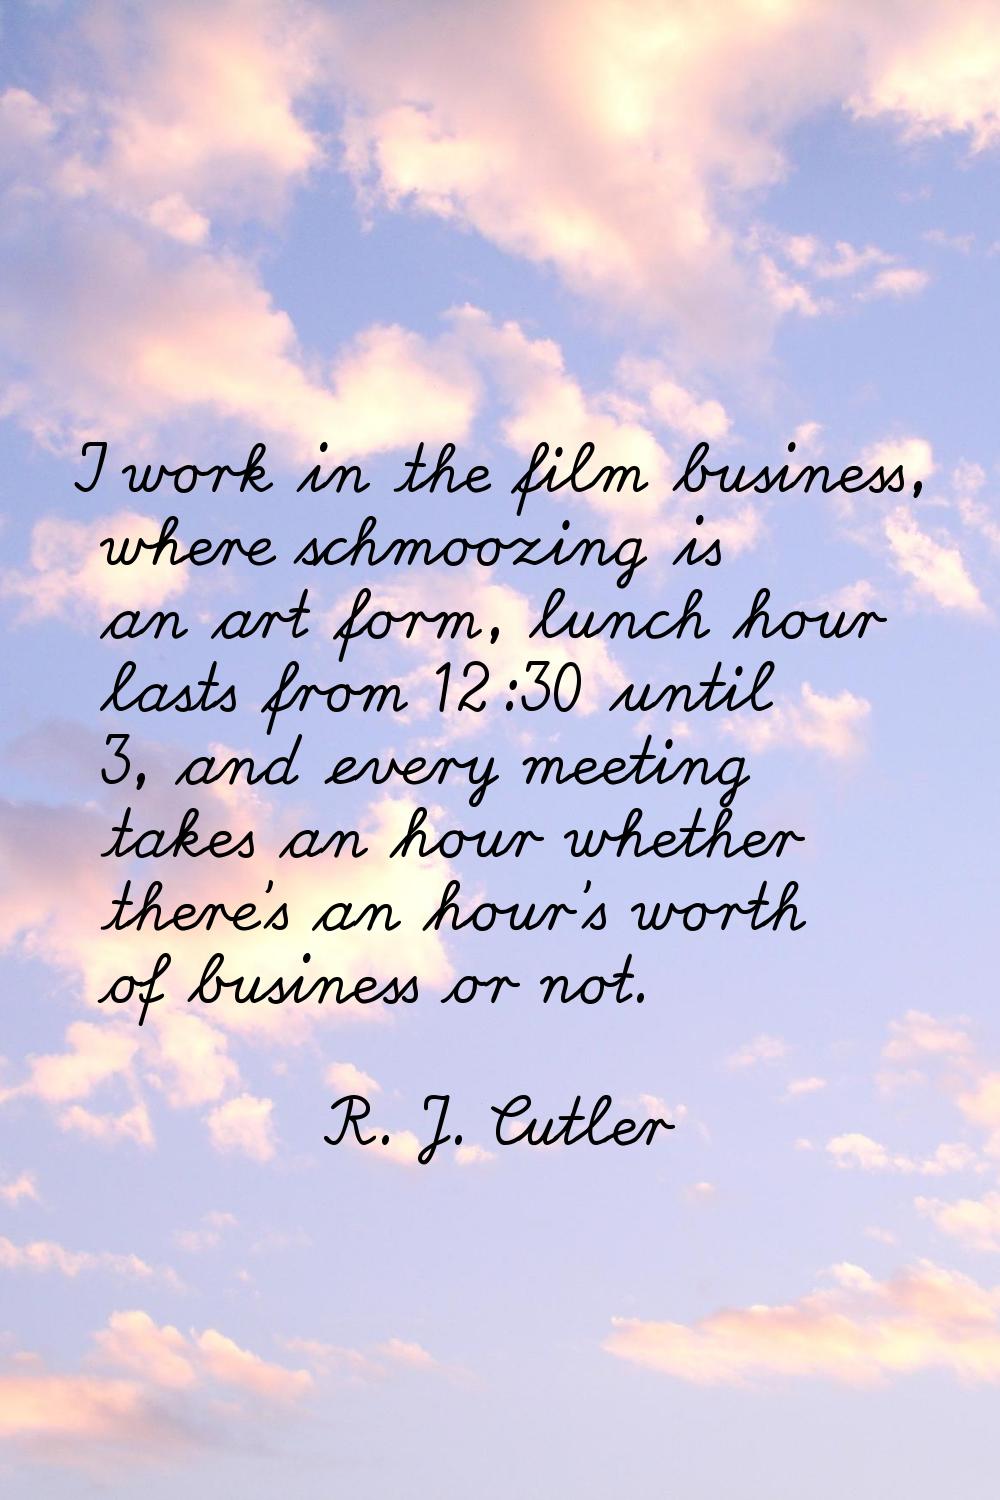 I work in the film business, where schmoozing is an art form, lunch hour lasts from 12:30 until 3, 